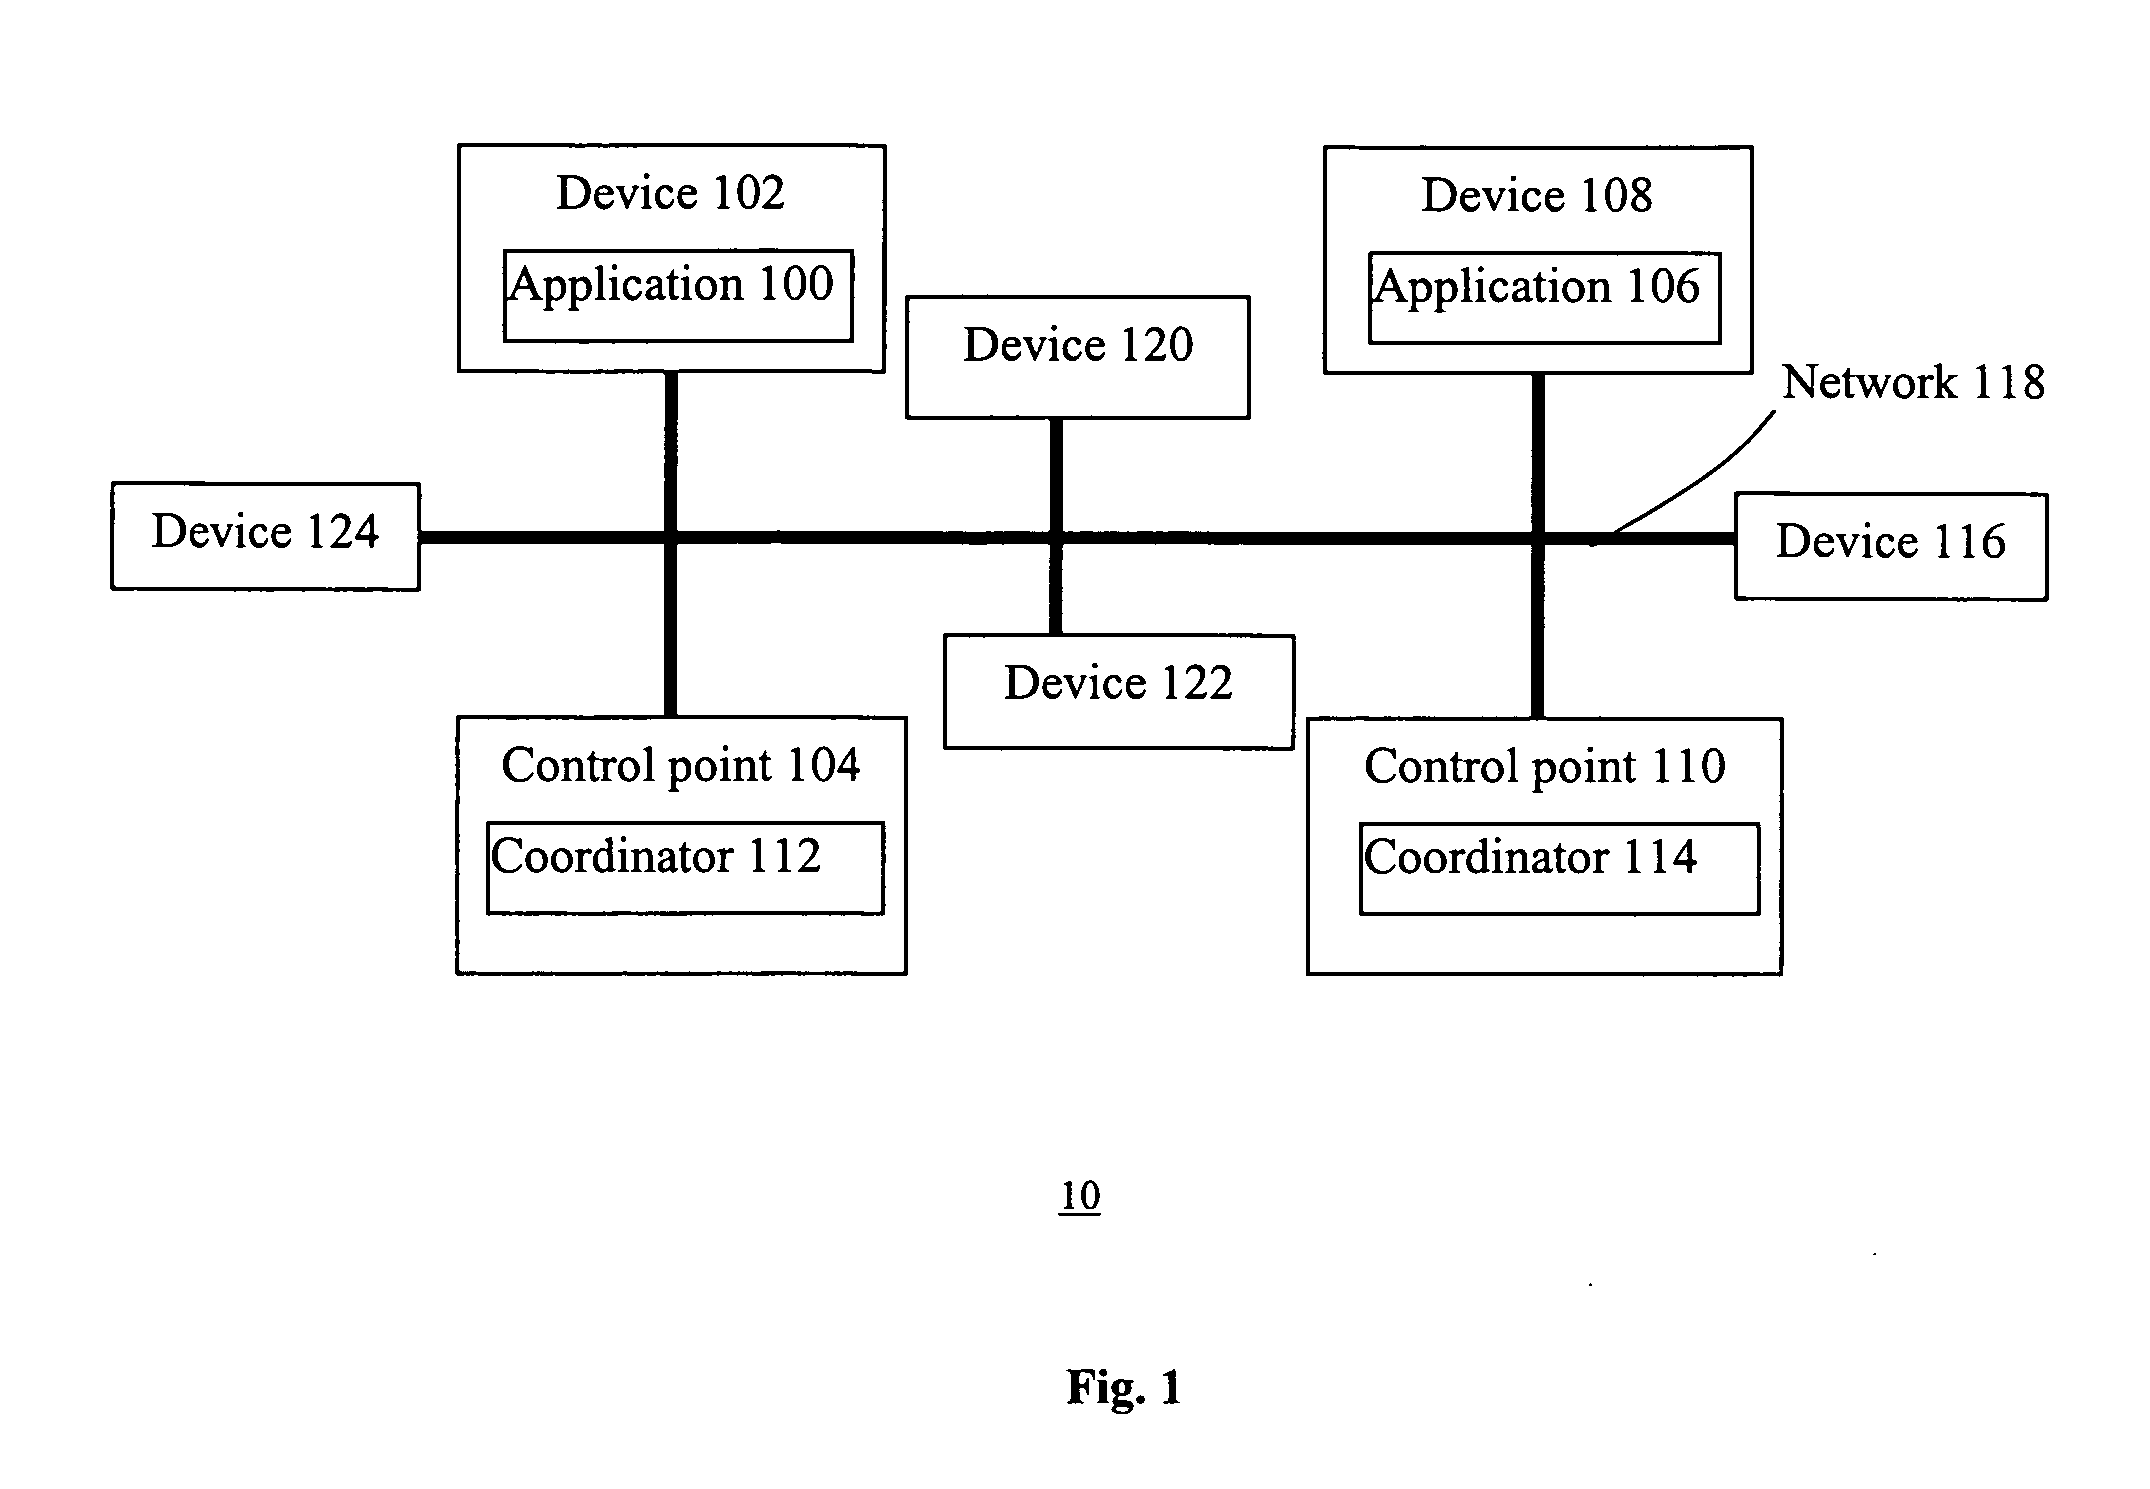 Method and system of coordinating control point state in a home environment